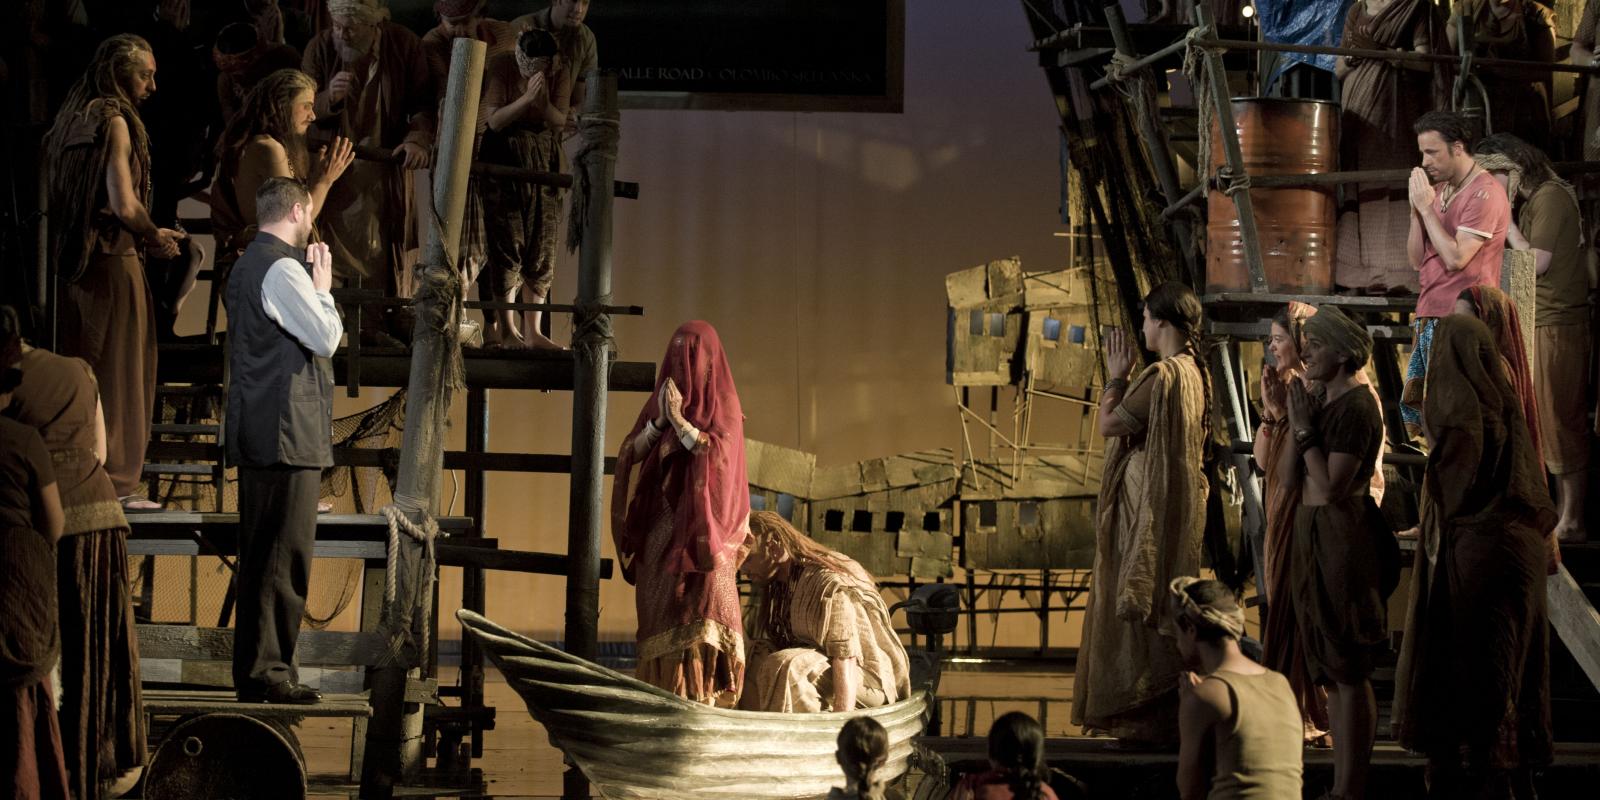 people praying surrounding a praying woman on a boat in ENO's The Pearl Fishers